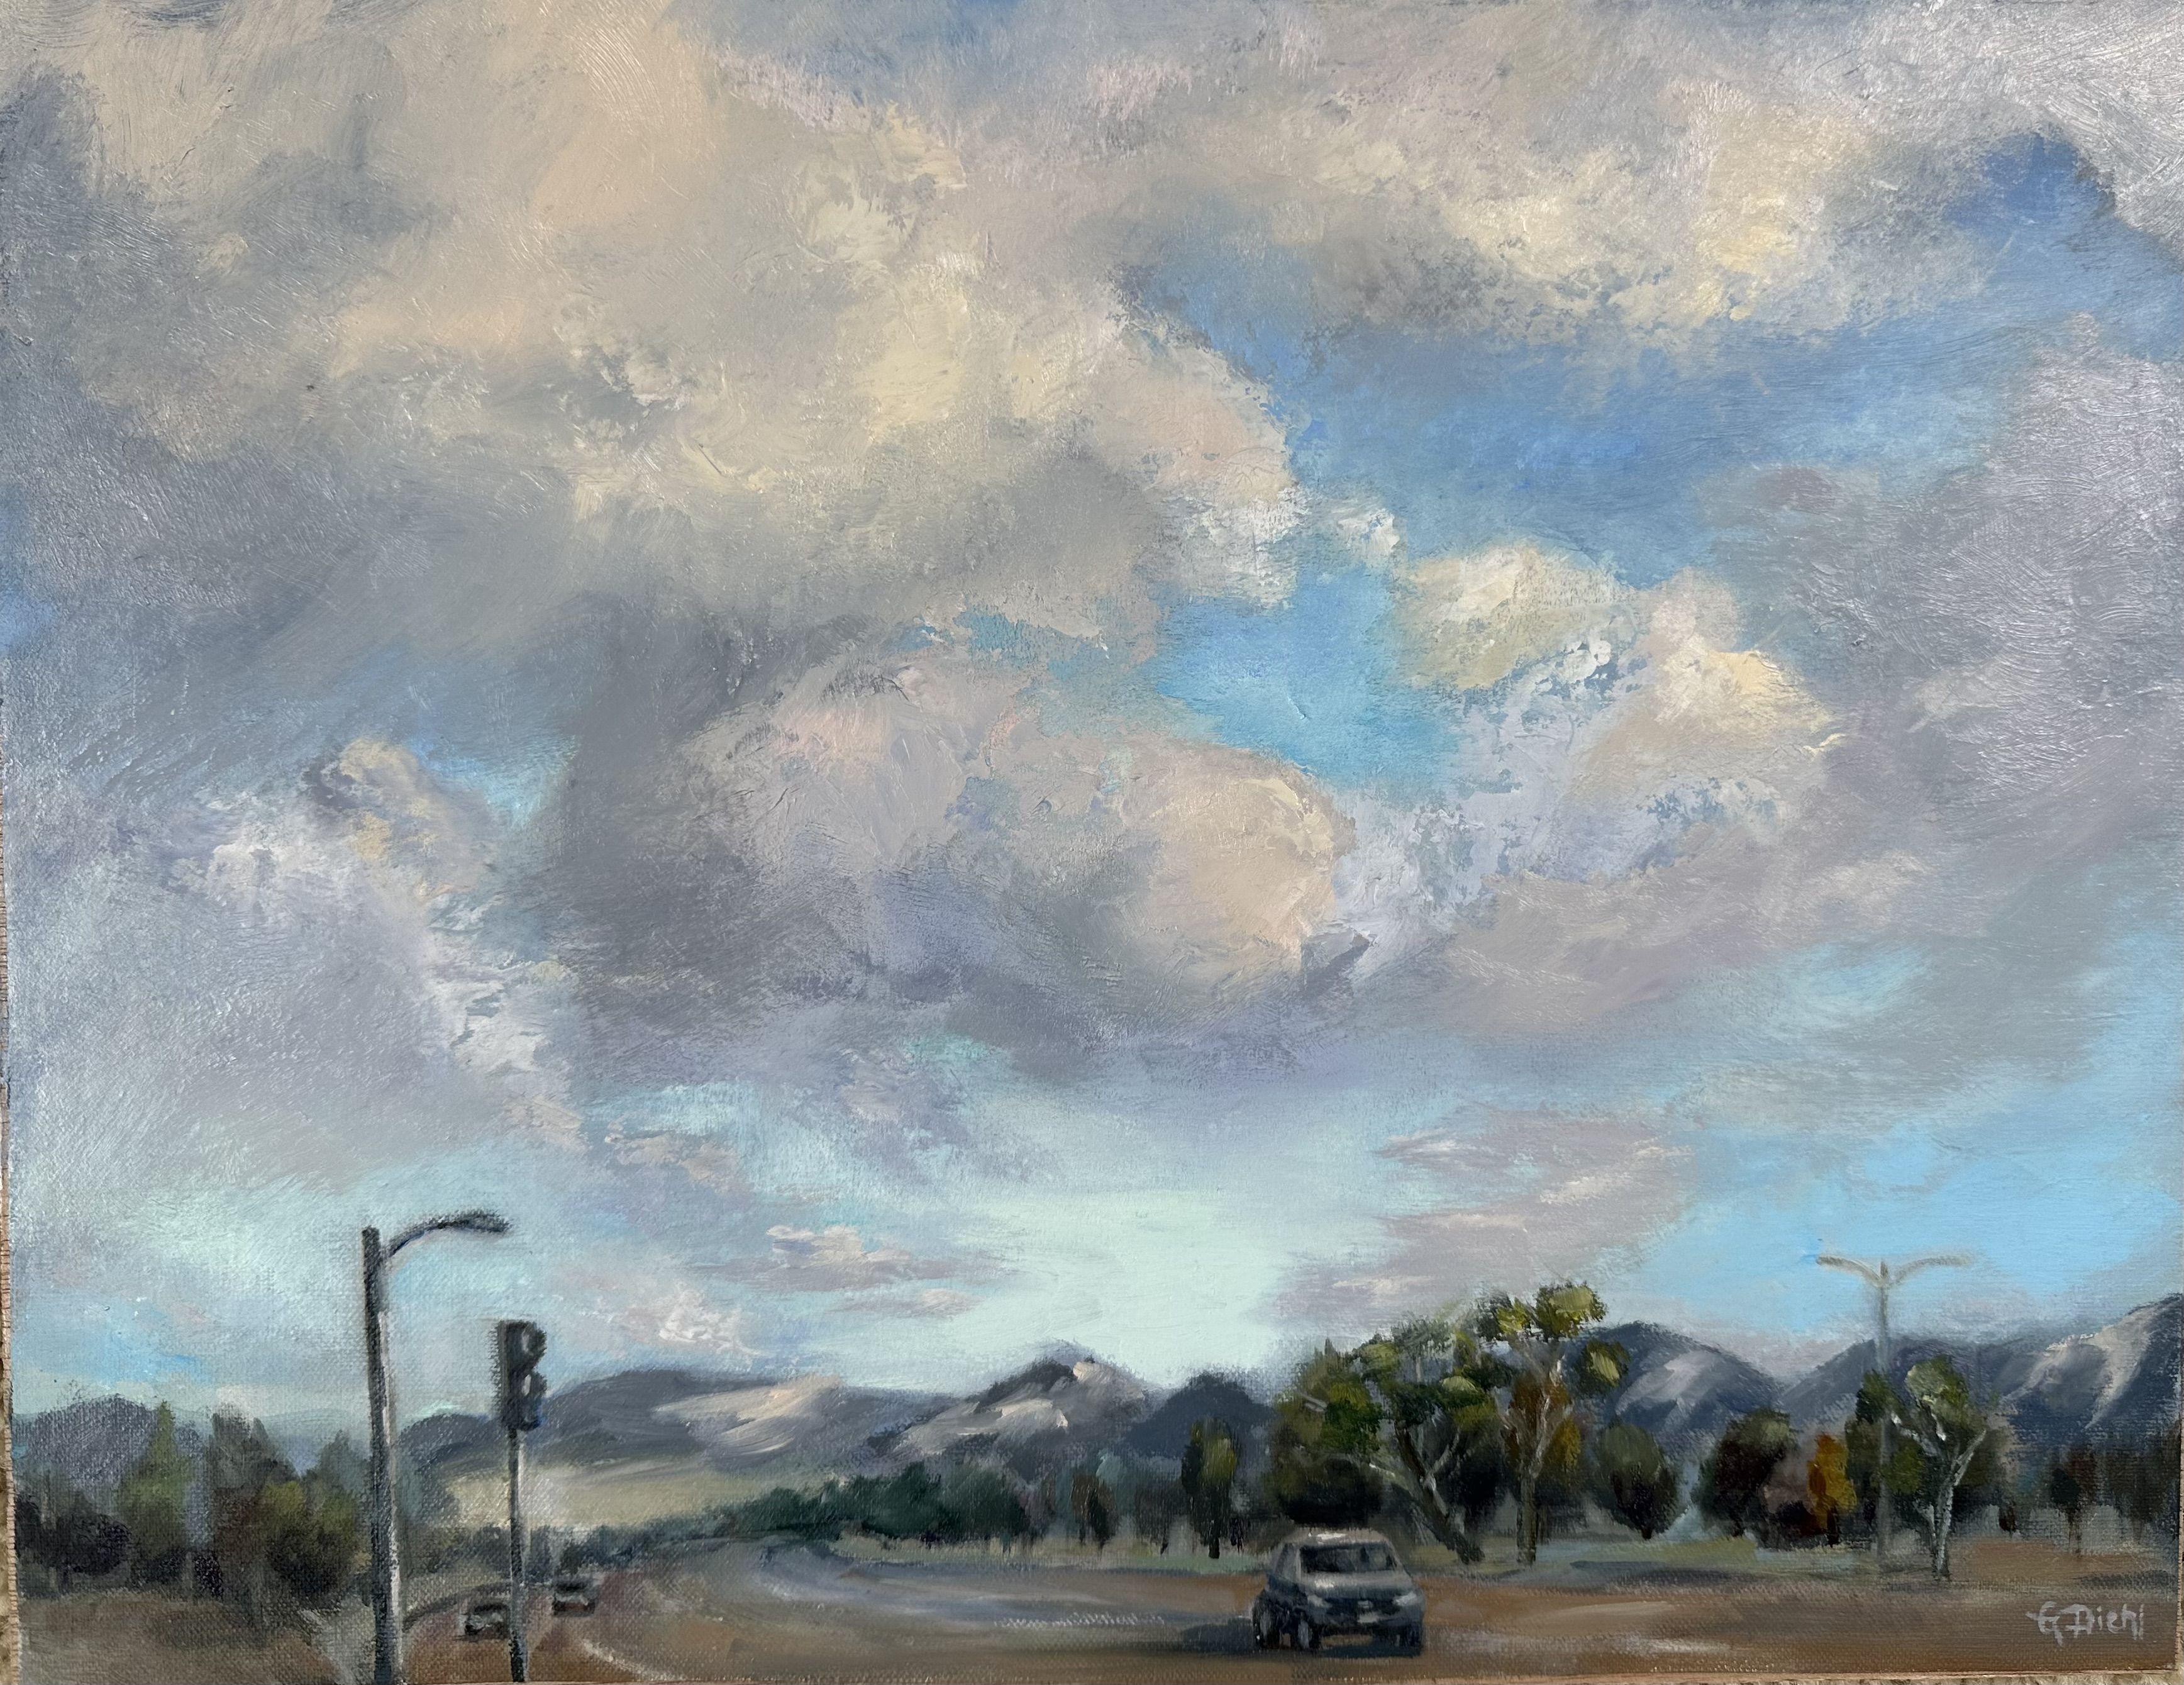 With the road below, the dramatic clouds above can create a striking contrast that captures the beauty of the Golden State. :: Painting :: Impressionist :: This piece comes with an official certificate of authenticity signed by the artist :: Ready